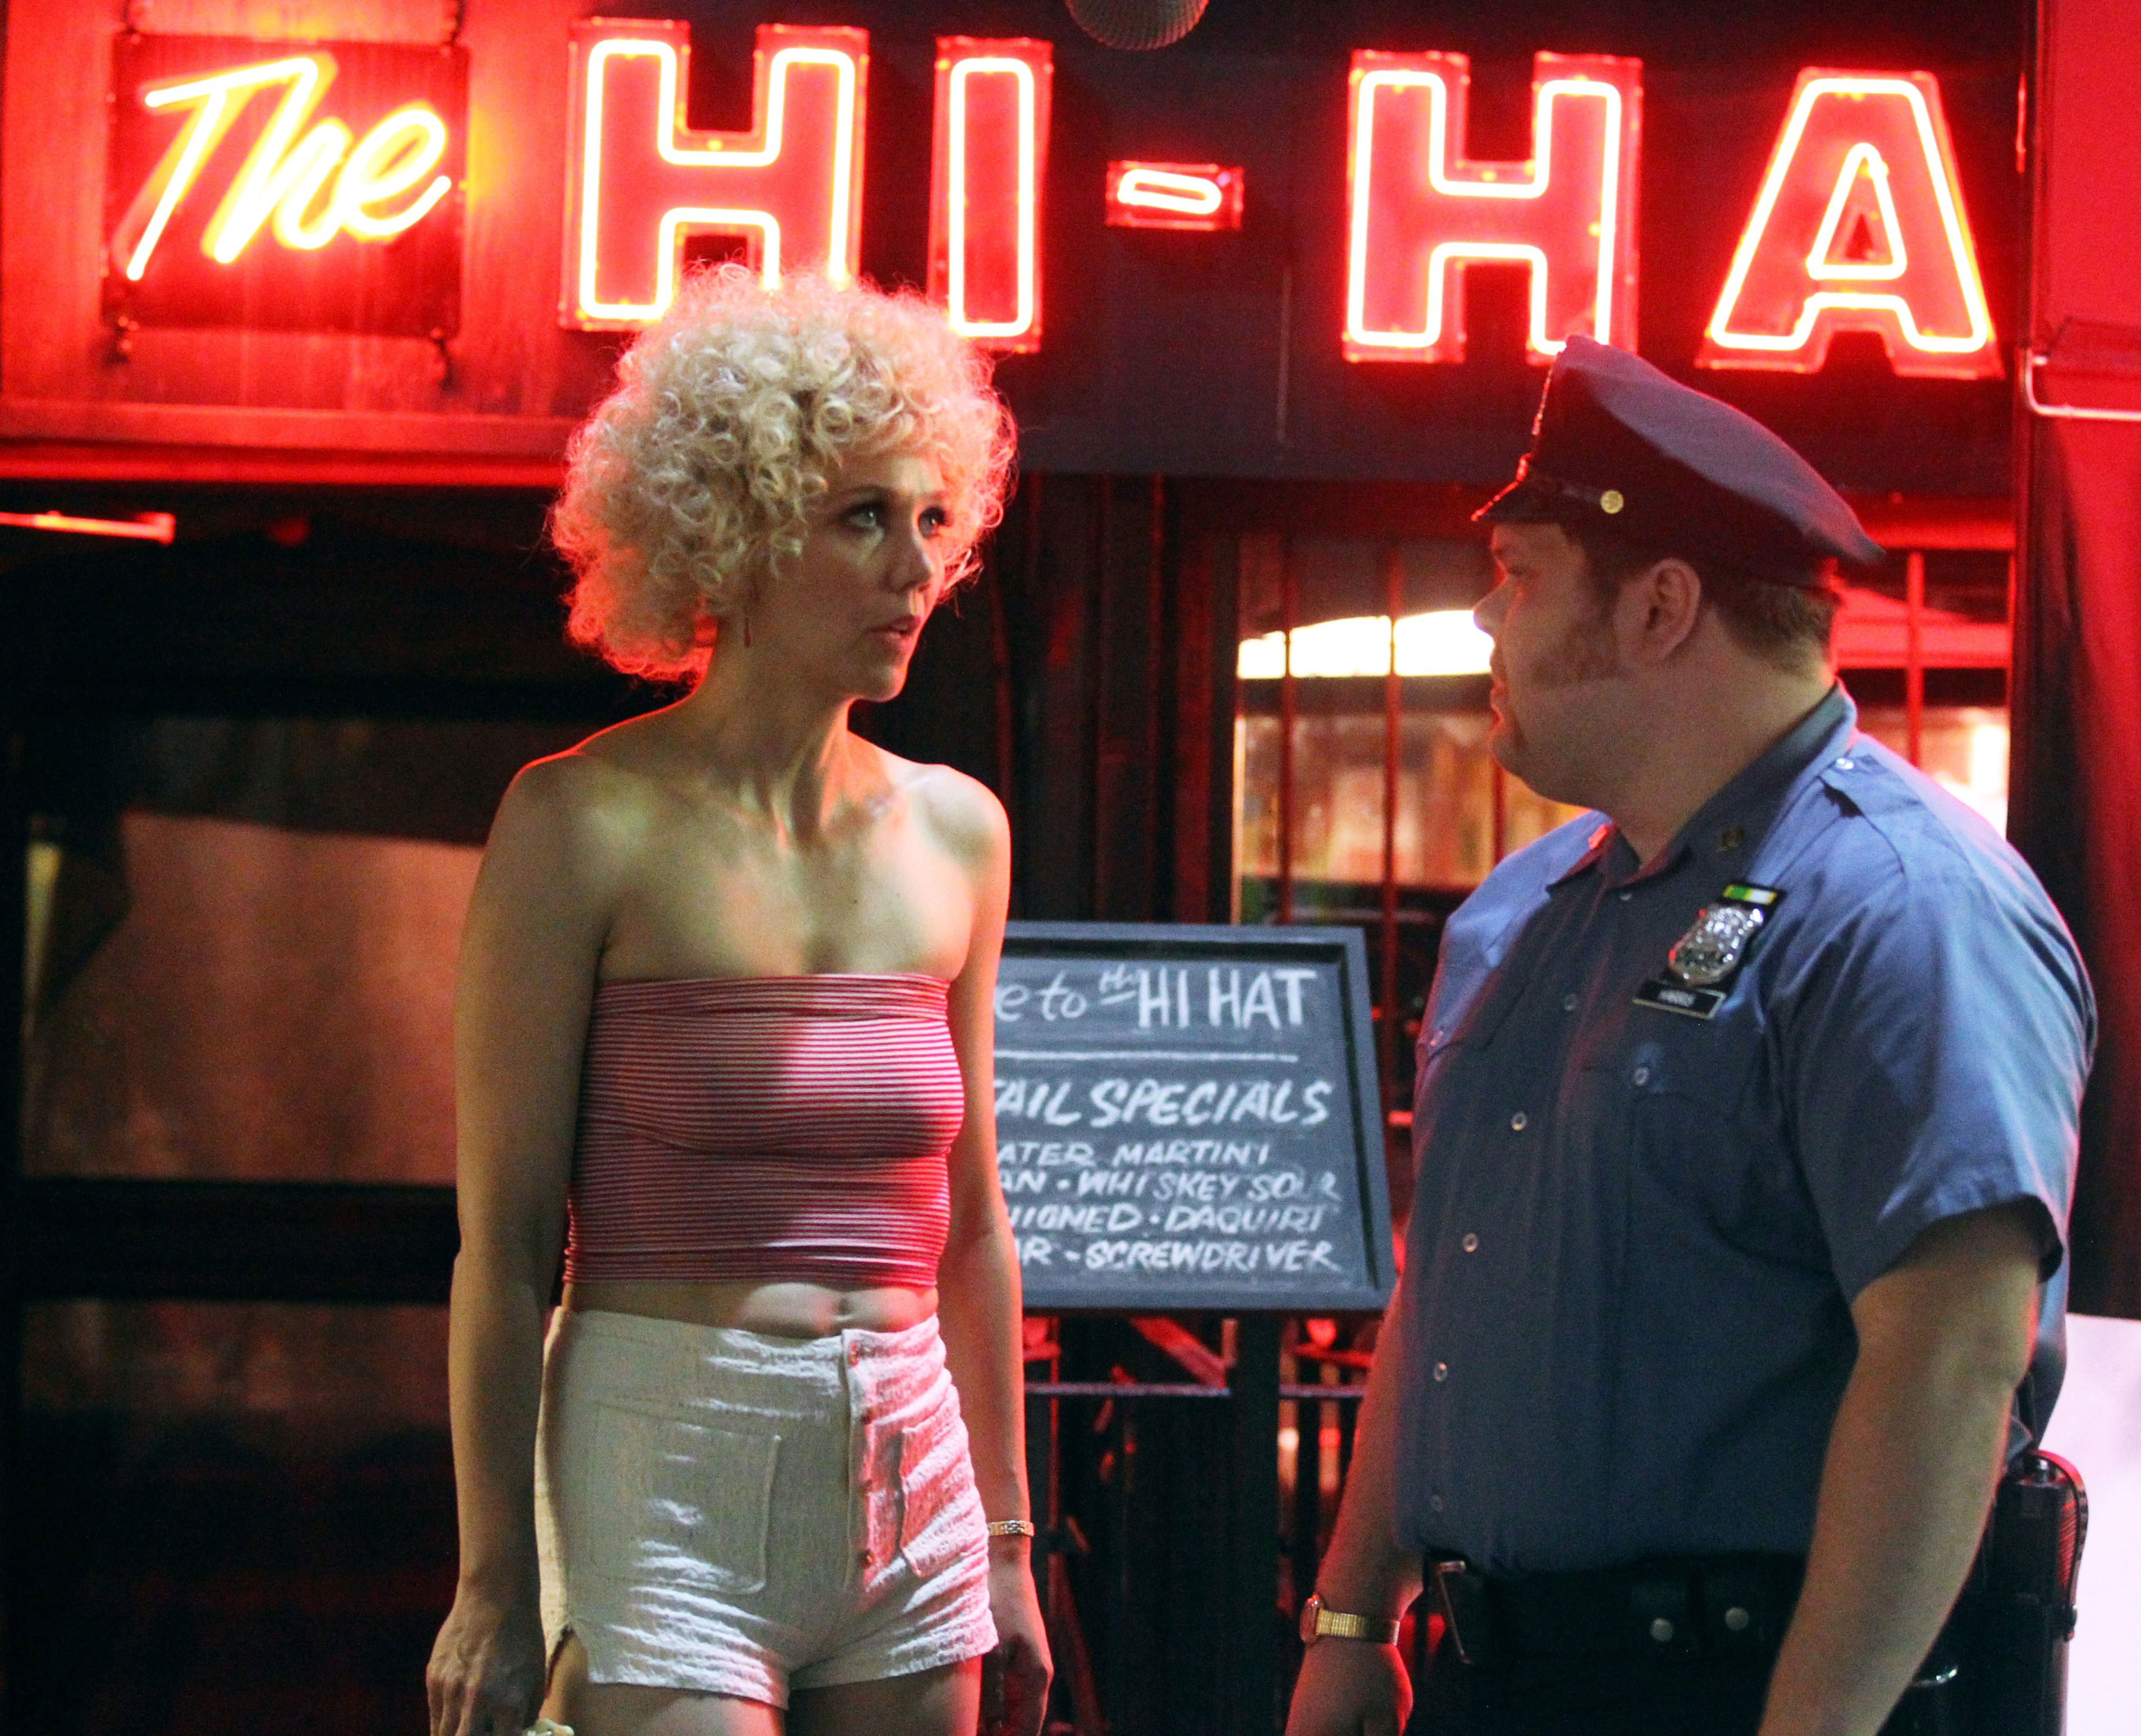 <p>In 2019, HBO released the third and final season of "The Deuce." Starring Maggie Gyllenhaal as baby-faced prostitute and single mom Candy, the series, which also stars <a href="https://www.wonderwall.com/celebrity/profiles/overview/james-franco-301.article">James Franco</a> as twins Vincent and Frankie Martino, dives deep into the world of sex trafficking and pornography in New York during the 1970s and '80s.</p>